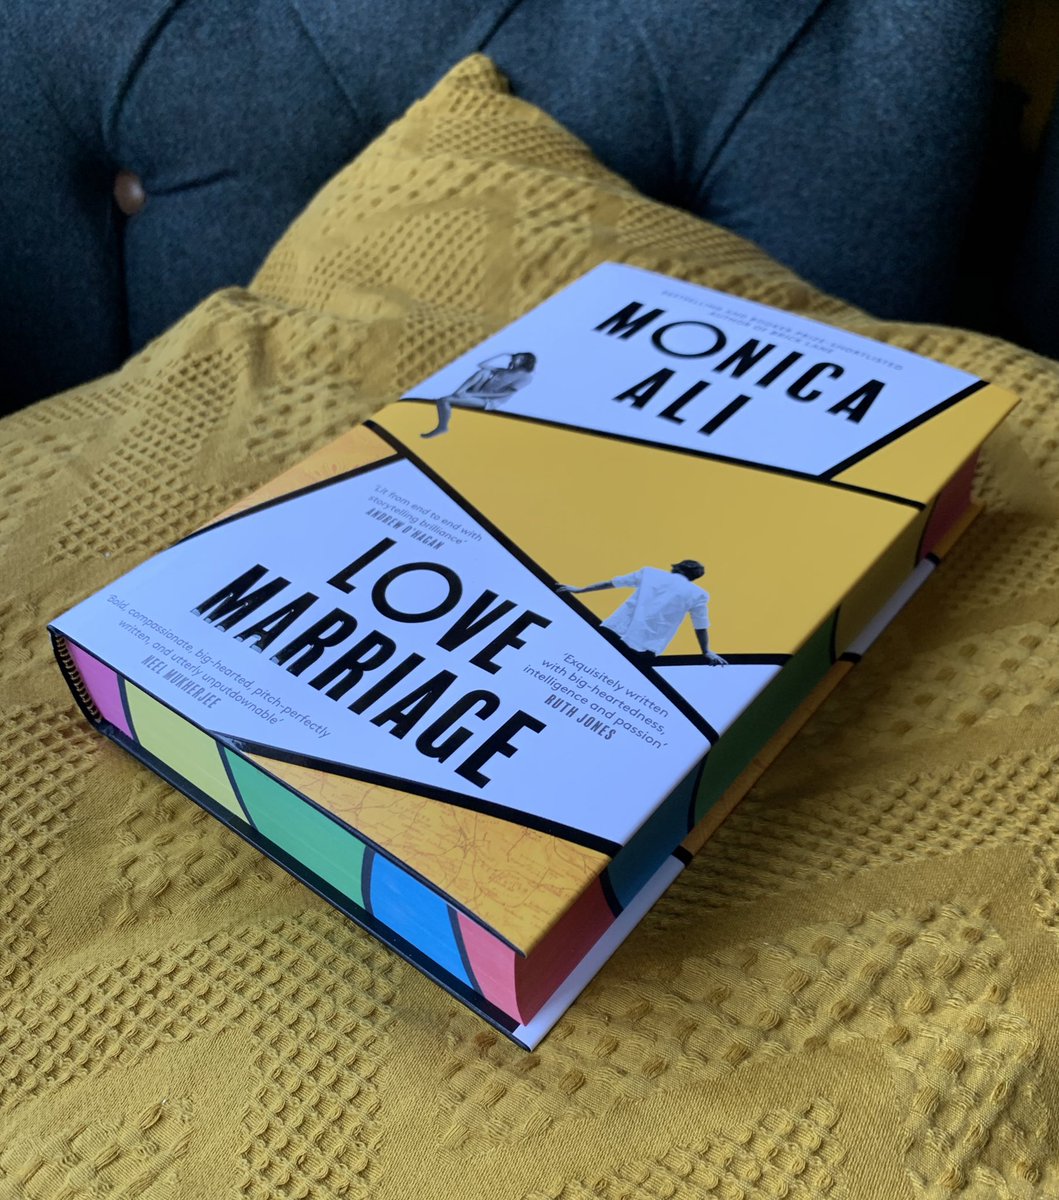 Loved this book so much, couldn’t resist this stunning Waterstones edition for my shelves!! 💗💛💚💙❤️
#MonicaAli #LoveMarriage